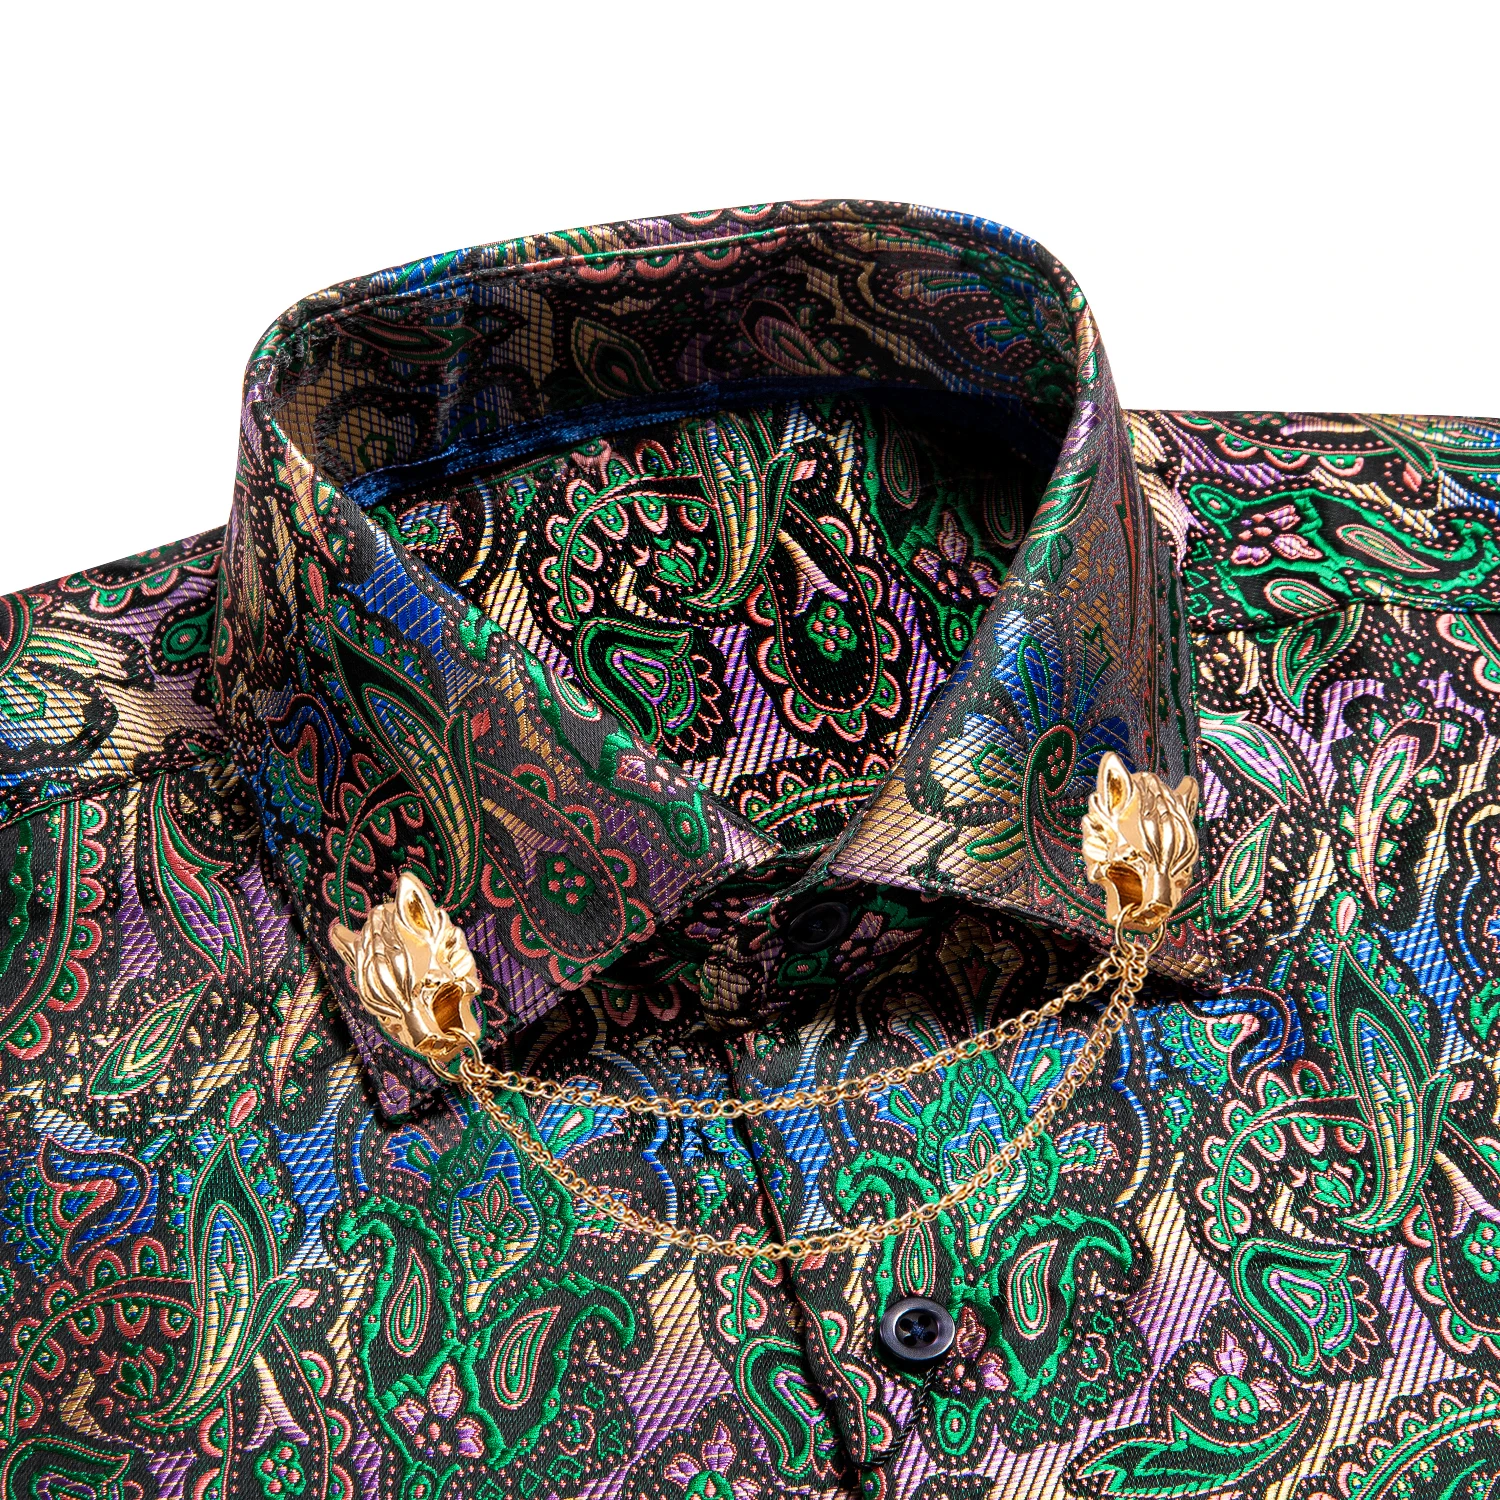 Novelty Men Silk Shirt Teal Green Purple Brown Long Sleeve Slim Fit Paisley Jacquard Shirt For Male Business Party Gifts Hi-Tie barry wang jacquard silk mens scarf floral paisley stylish burgundy gold green red blue purple for male wedding business party